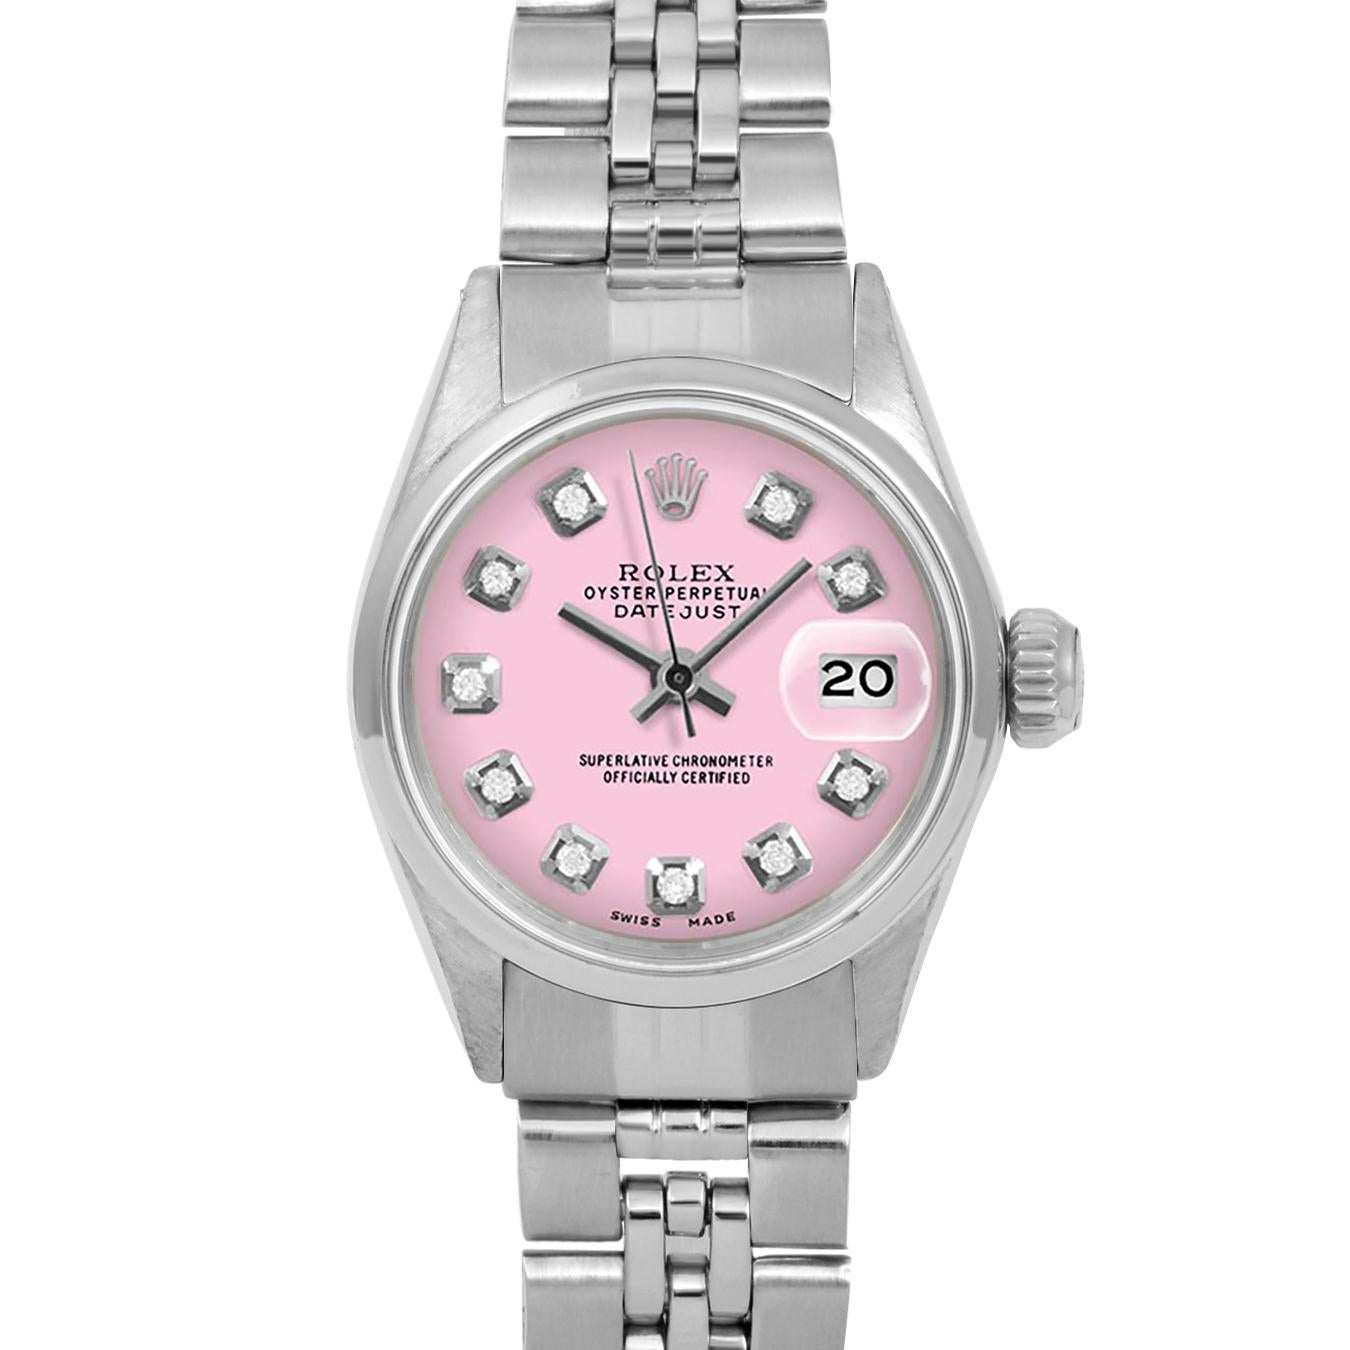 Brand : Rolex
Model : Datejust (Non-Quickset Model)
Gender : Ladies
Metals : Stainless Steel
Case Size : 24 mm

Dial : Custom Pink Diamond Dial (This dial is not original Rolex And has been added aftermarket yet is a beautiful Custom